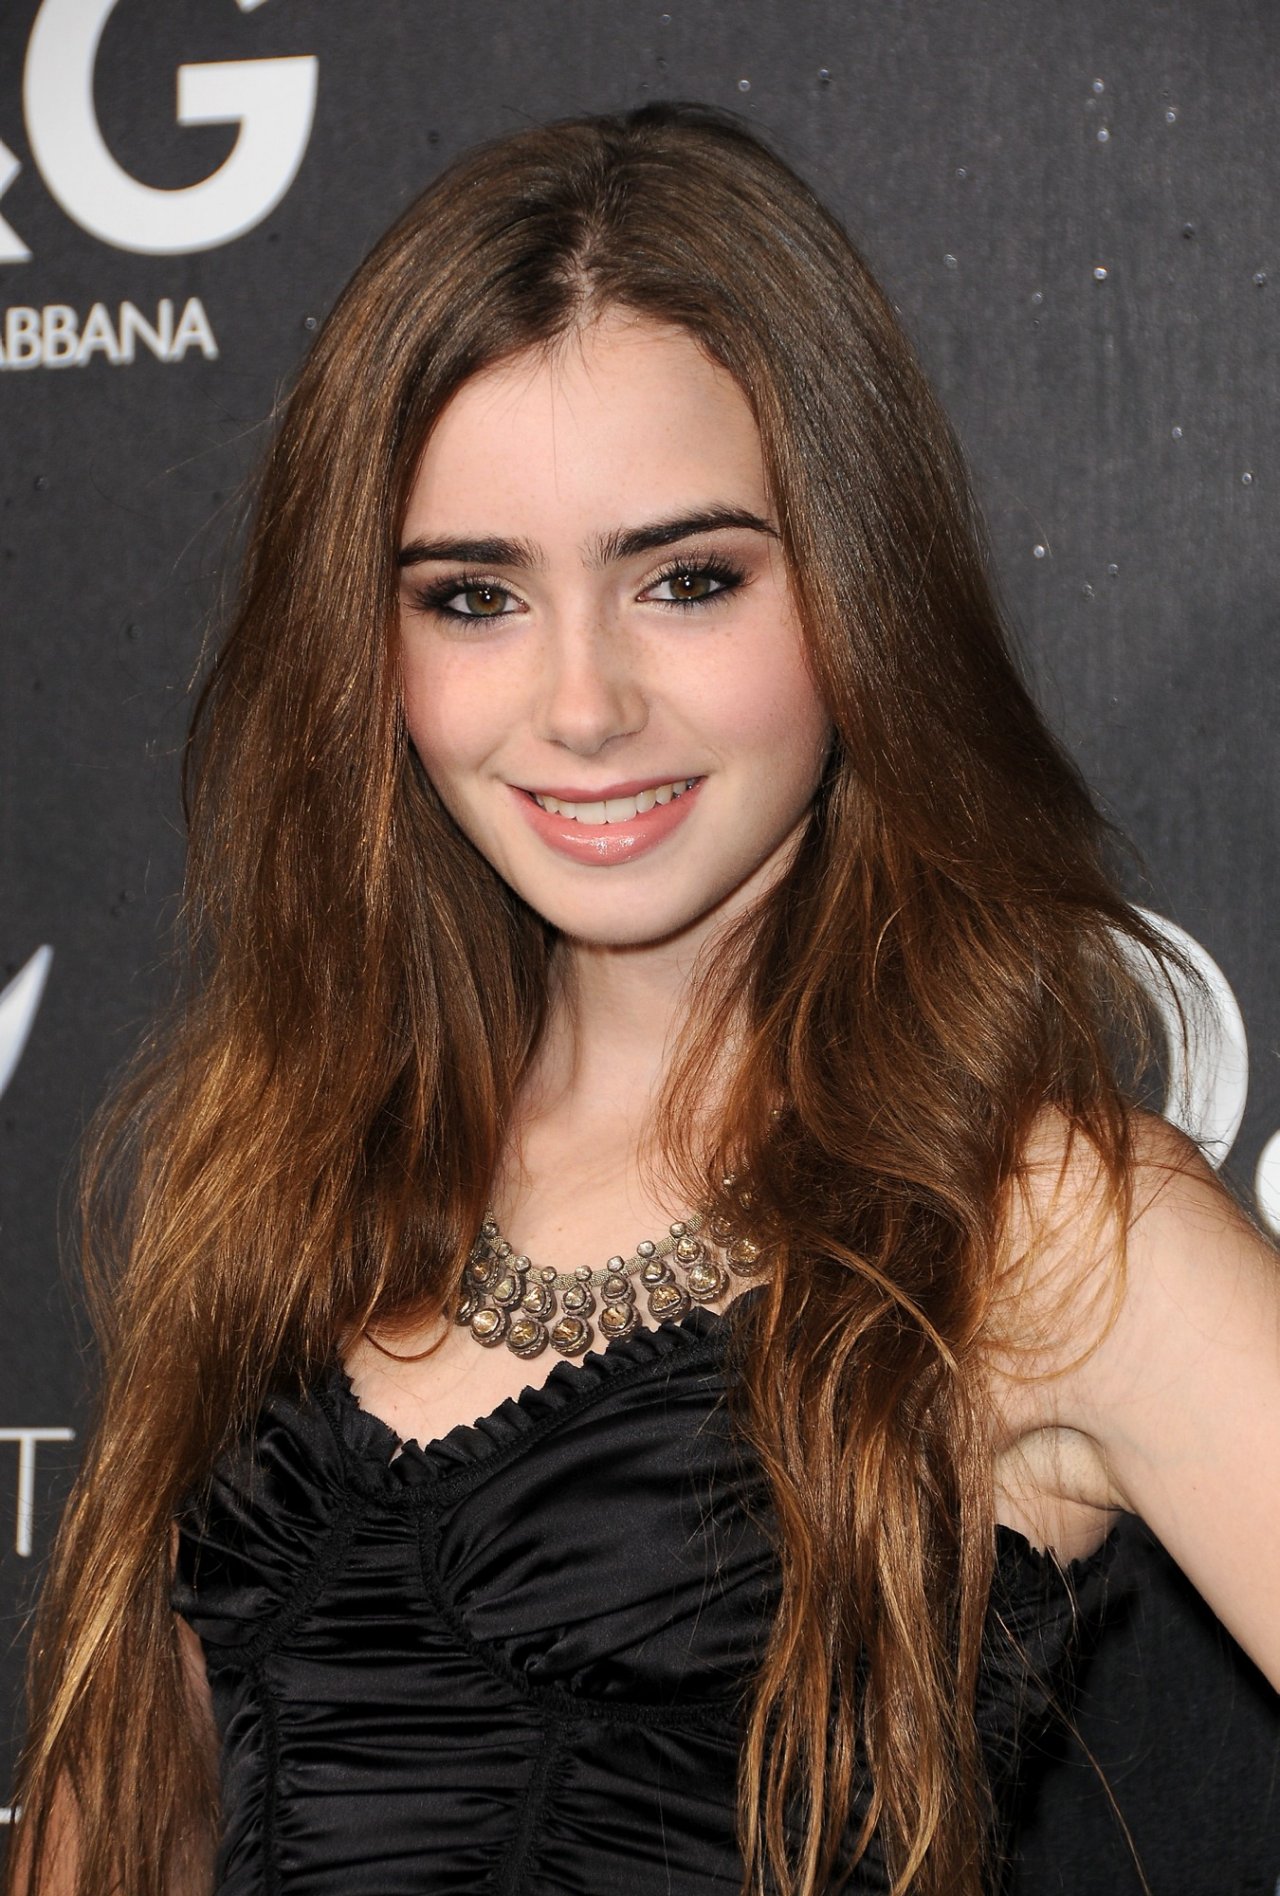 Lily Collins leaked wallpapers